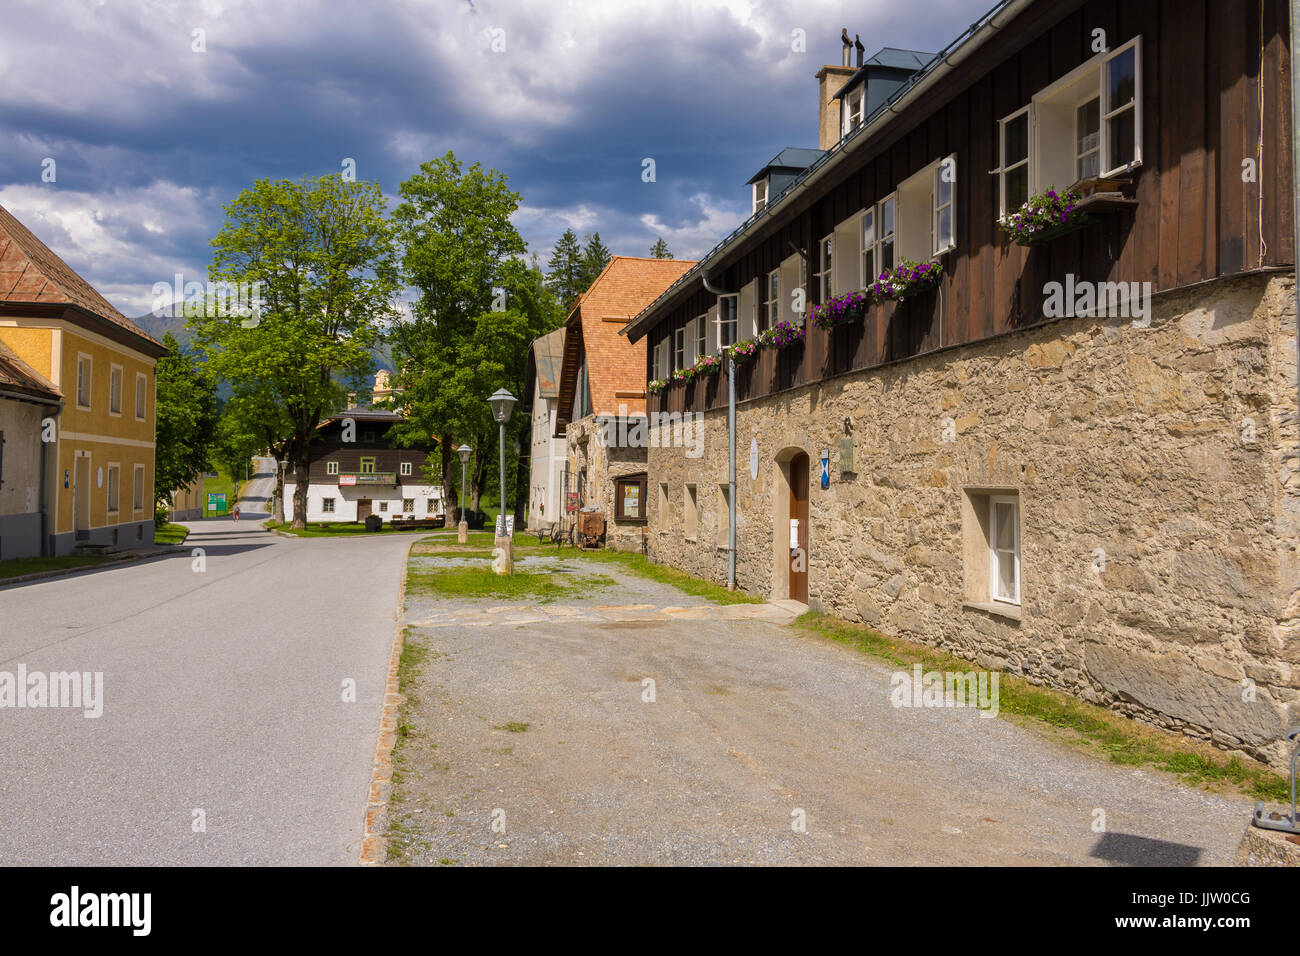 Böckstein, Salzburg Austria - JUNE 09, 2017: Old Gold mining museum, Montane Museum with gold plants and old houses in Austria Stock Photo